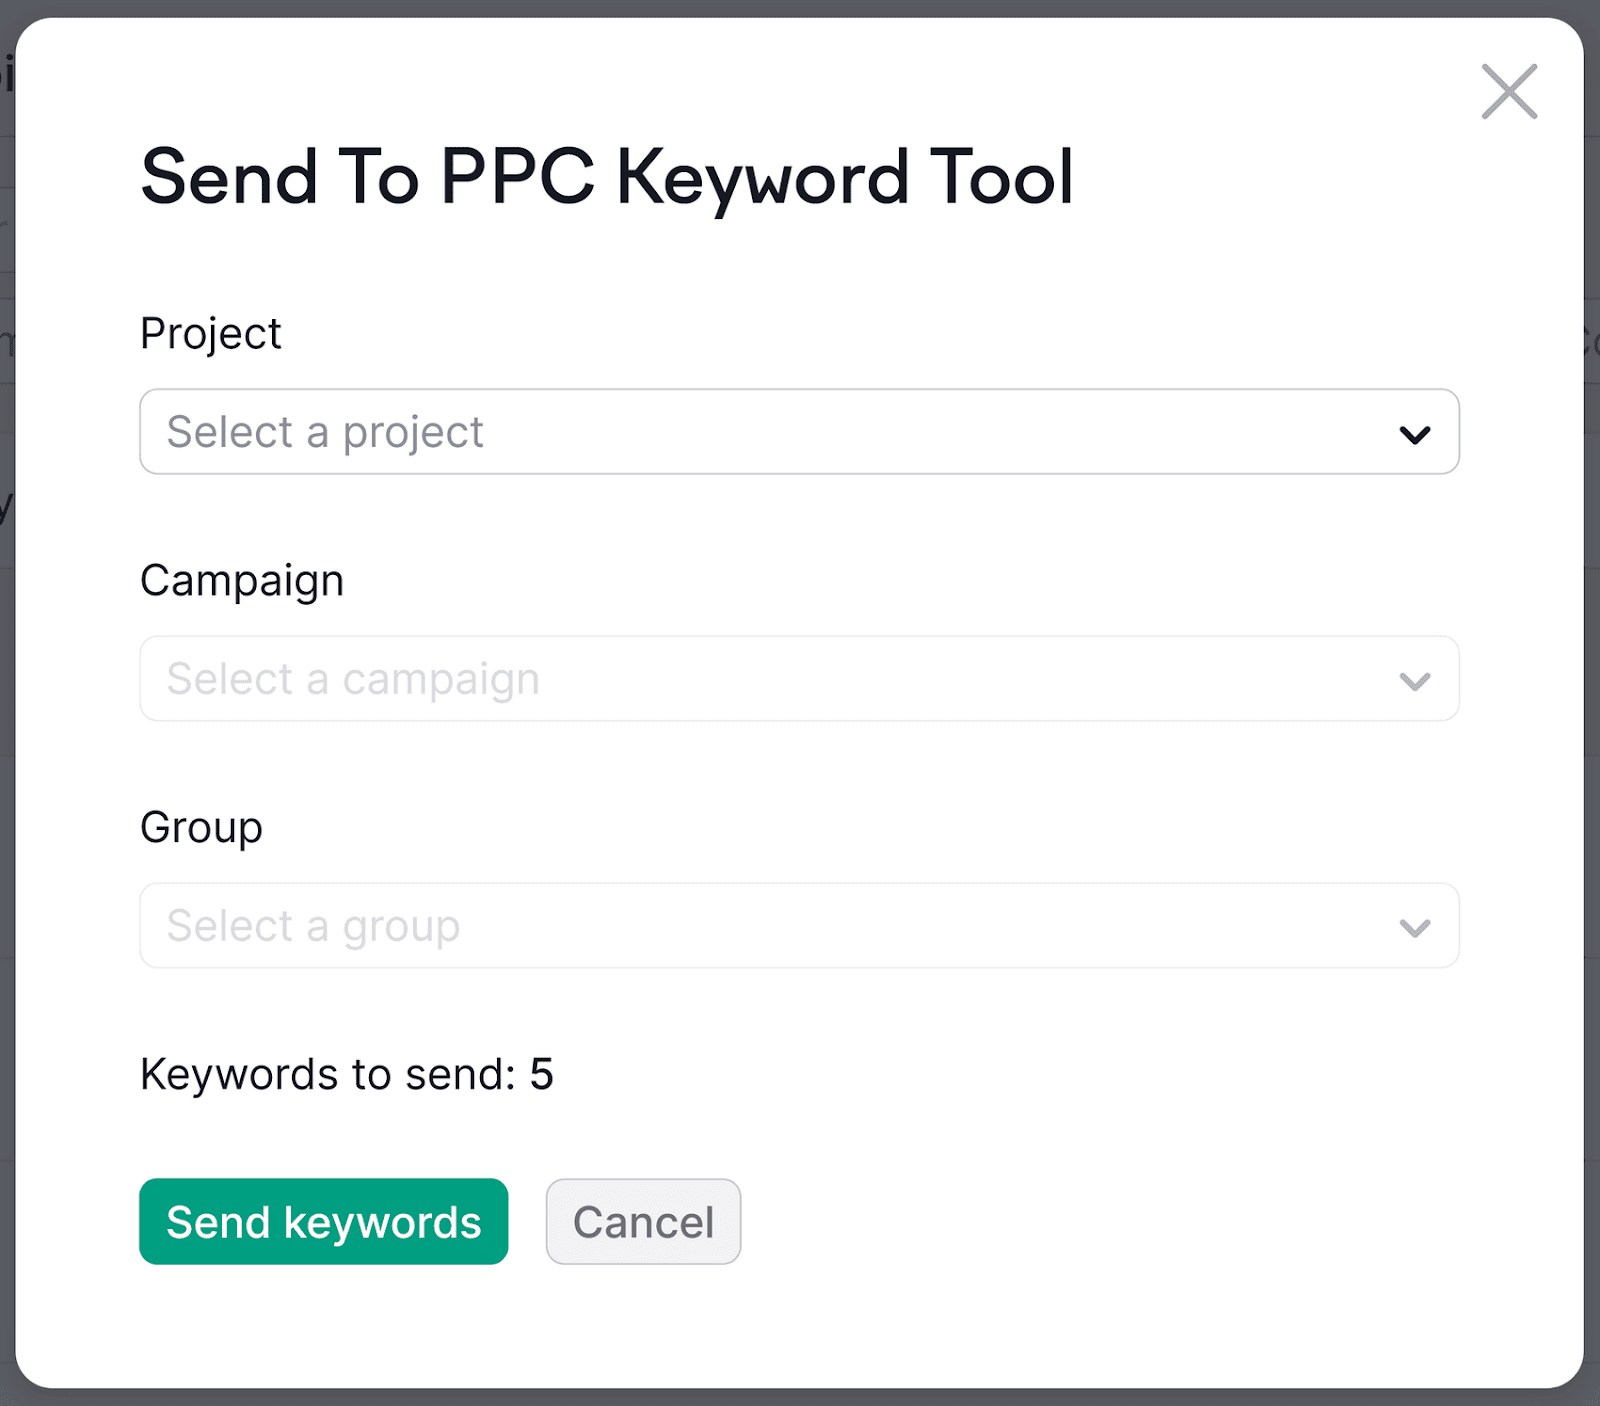 Popup for "Send To PPC Keyword Tool" with dropdown menus for "Project," "Campaign," and "Group."